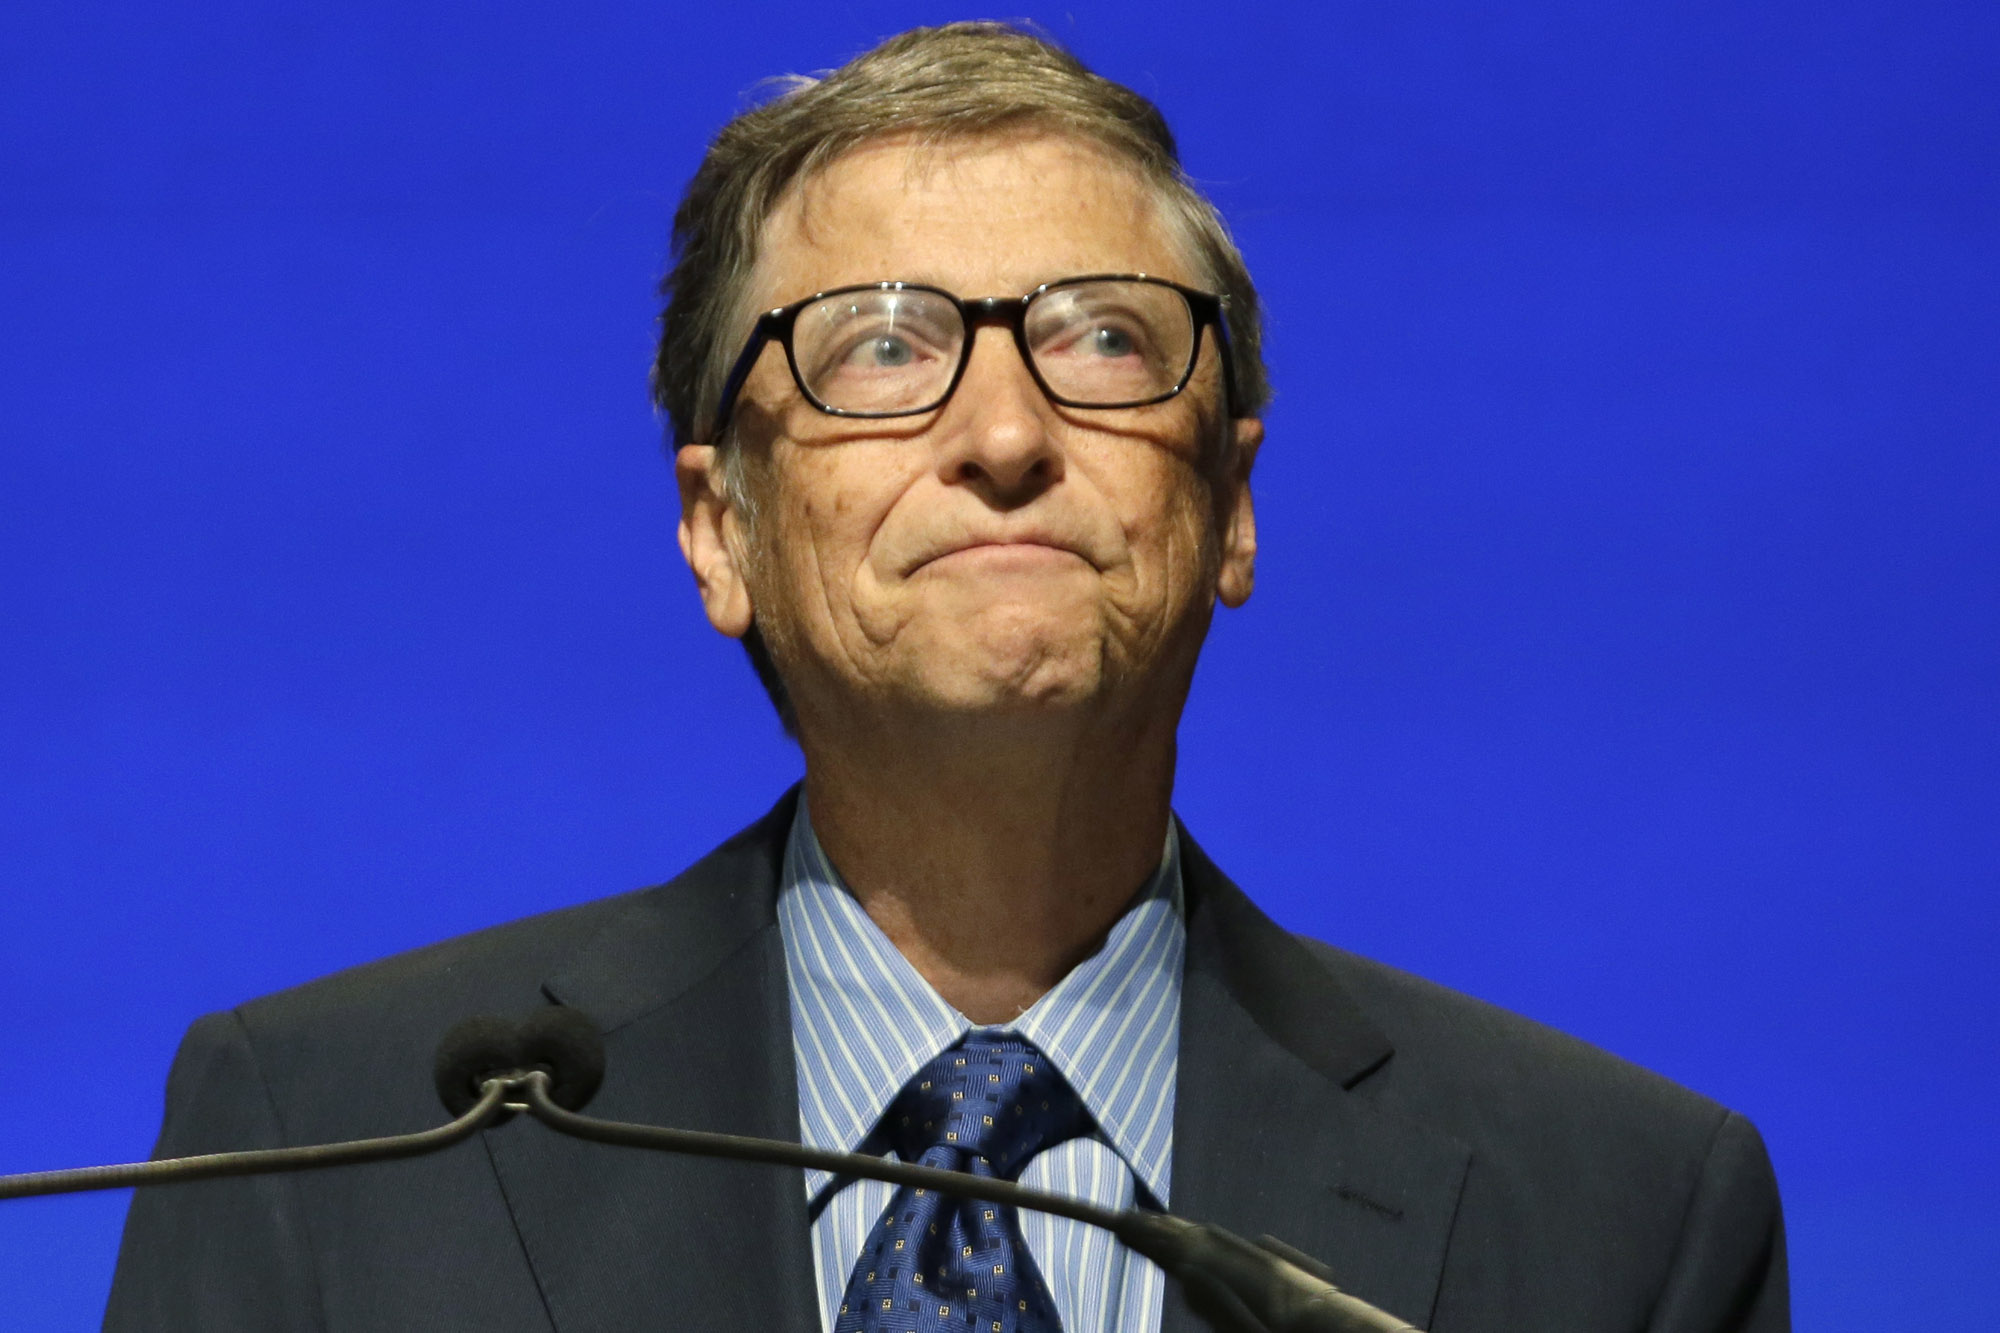 Microsoft chairman Bill Gates chokes up as he end his remarks at the company's annual shareholders meeting Tuesday, Nov. 19, 2013, in Redmond, Wash.